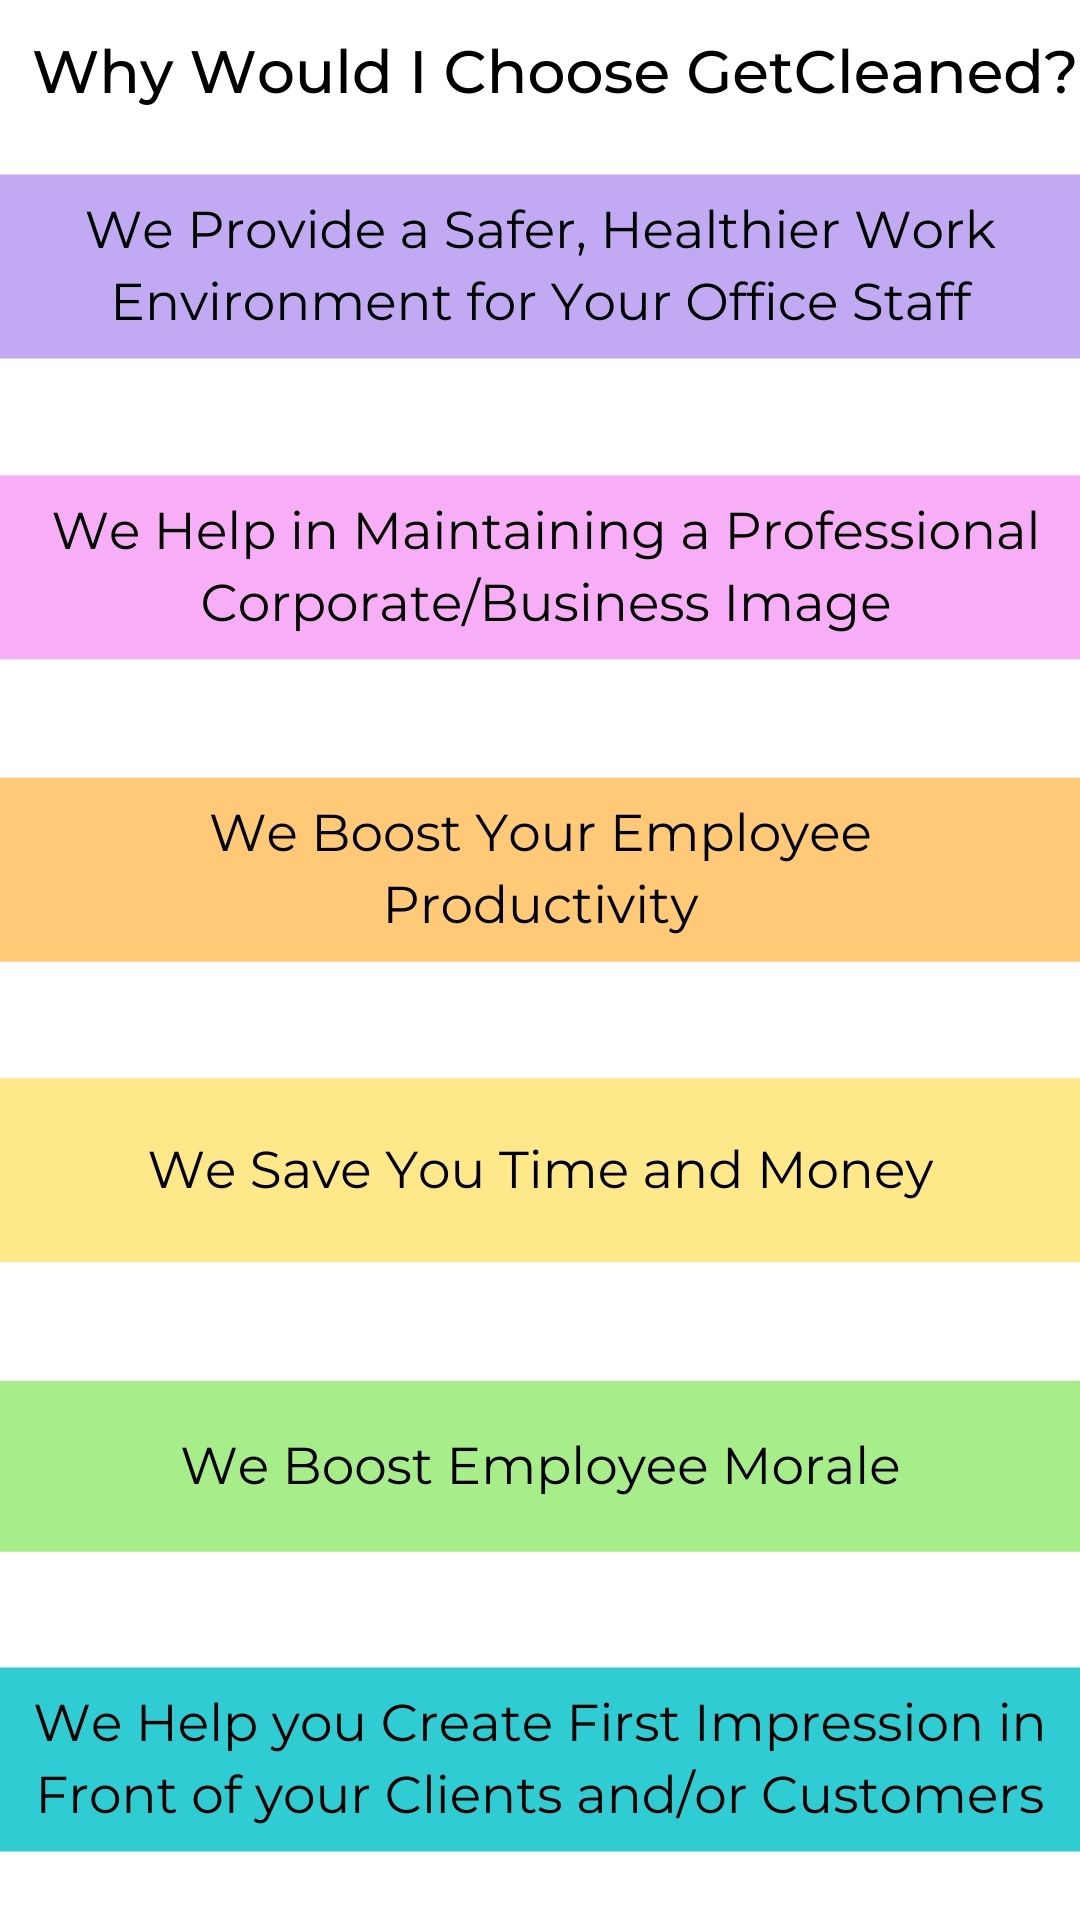 Reasons to hire us as your commercial cleaner for your business. 1. We Provide a Safer, Healthier Work Environment for Your Office Staff. 2. We Help in Maintaining a Professional Corporate/Business Image. 3. We Boost Your Employee Productivity. 4. We Save You Time and Money. 5. We Boost Employee Morale. 6. We Help you Create First Impression in Front of your Clients and/or Customers